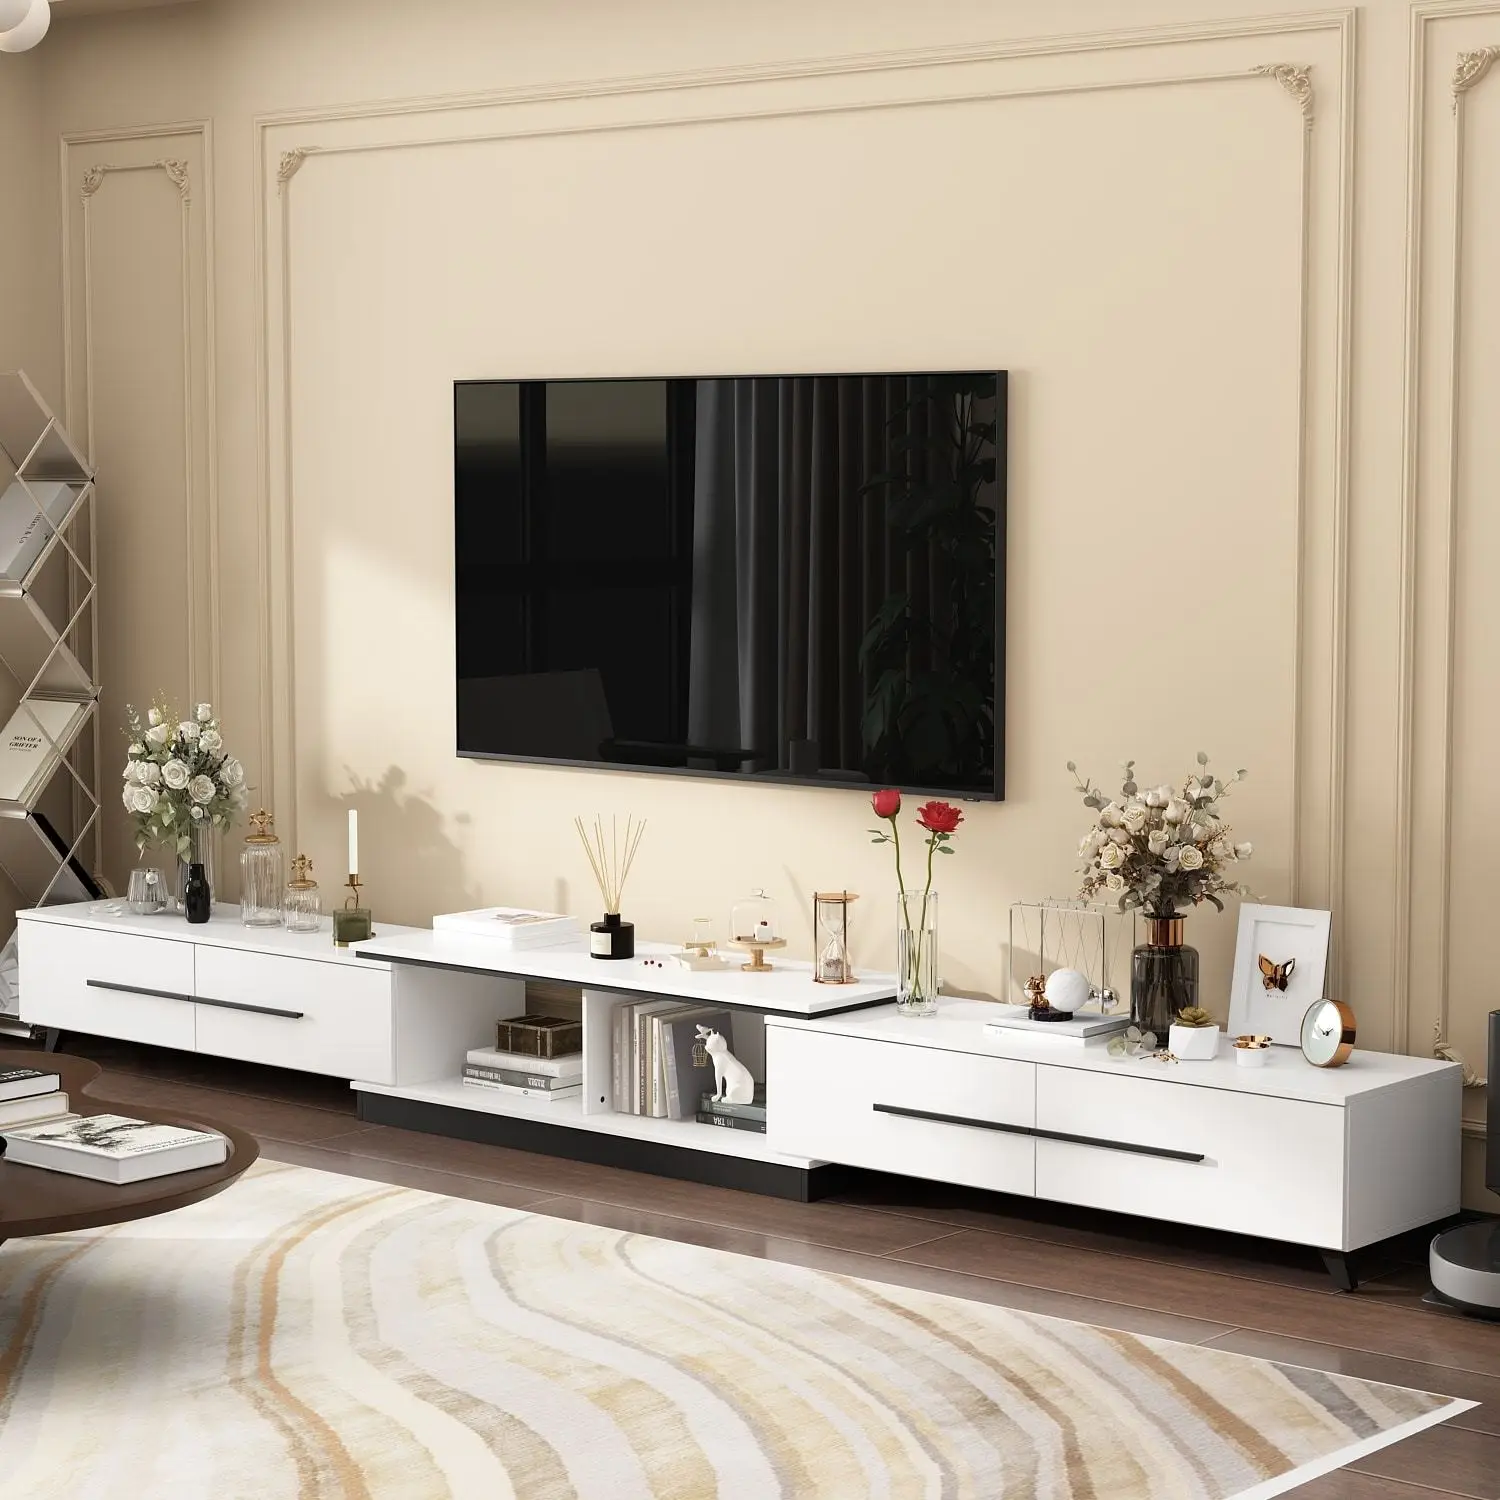 

95-136.2W x 15.2D x 13.1H Sleek Modern TV Console Cabinet - Extendable Design, Ample Storage with Drawers, Sturdy Legs Bluetoot